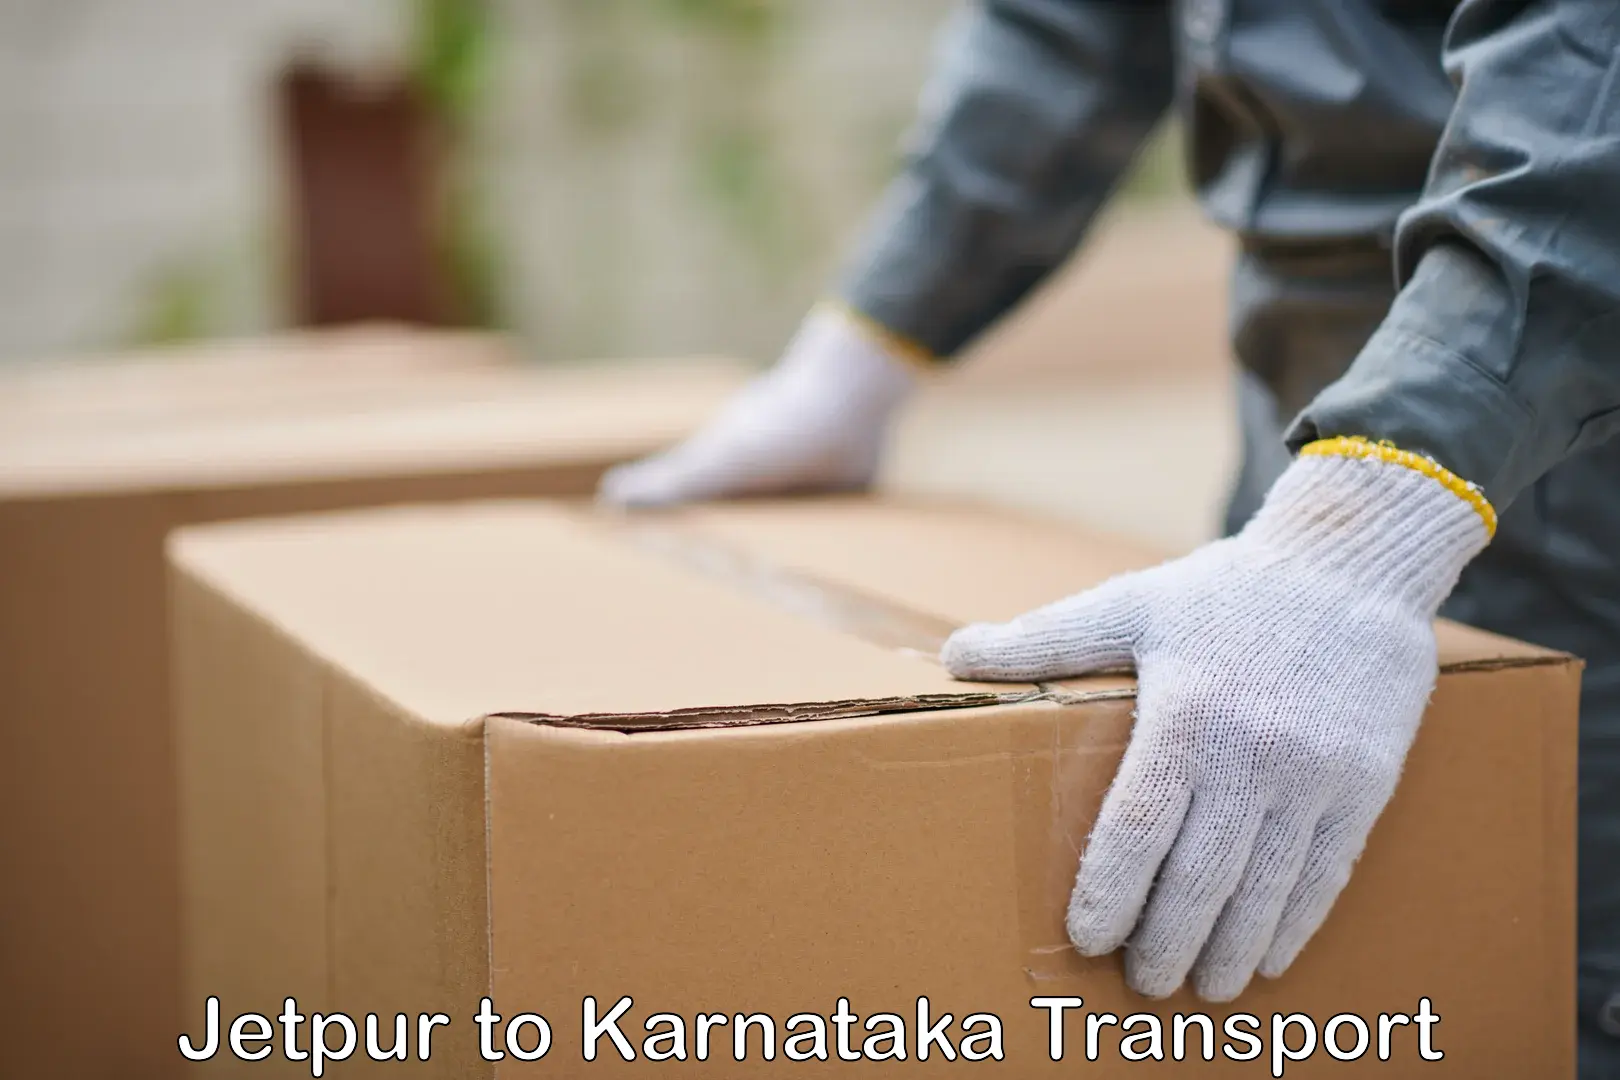 Express transport services Jetpur to Siruguppa